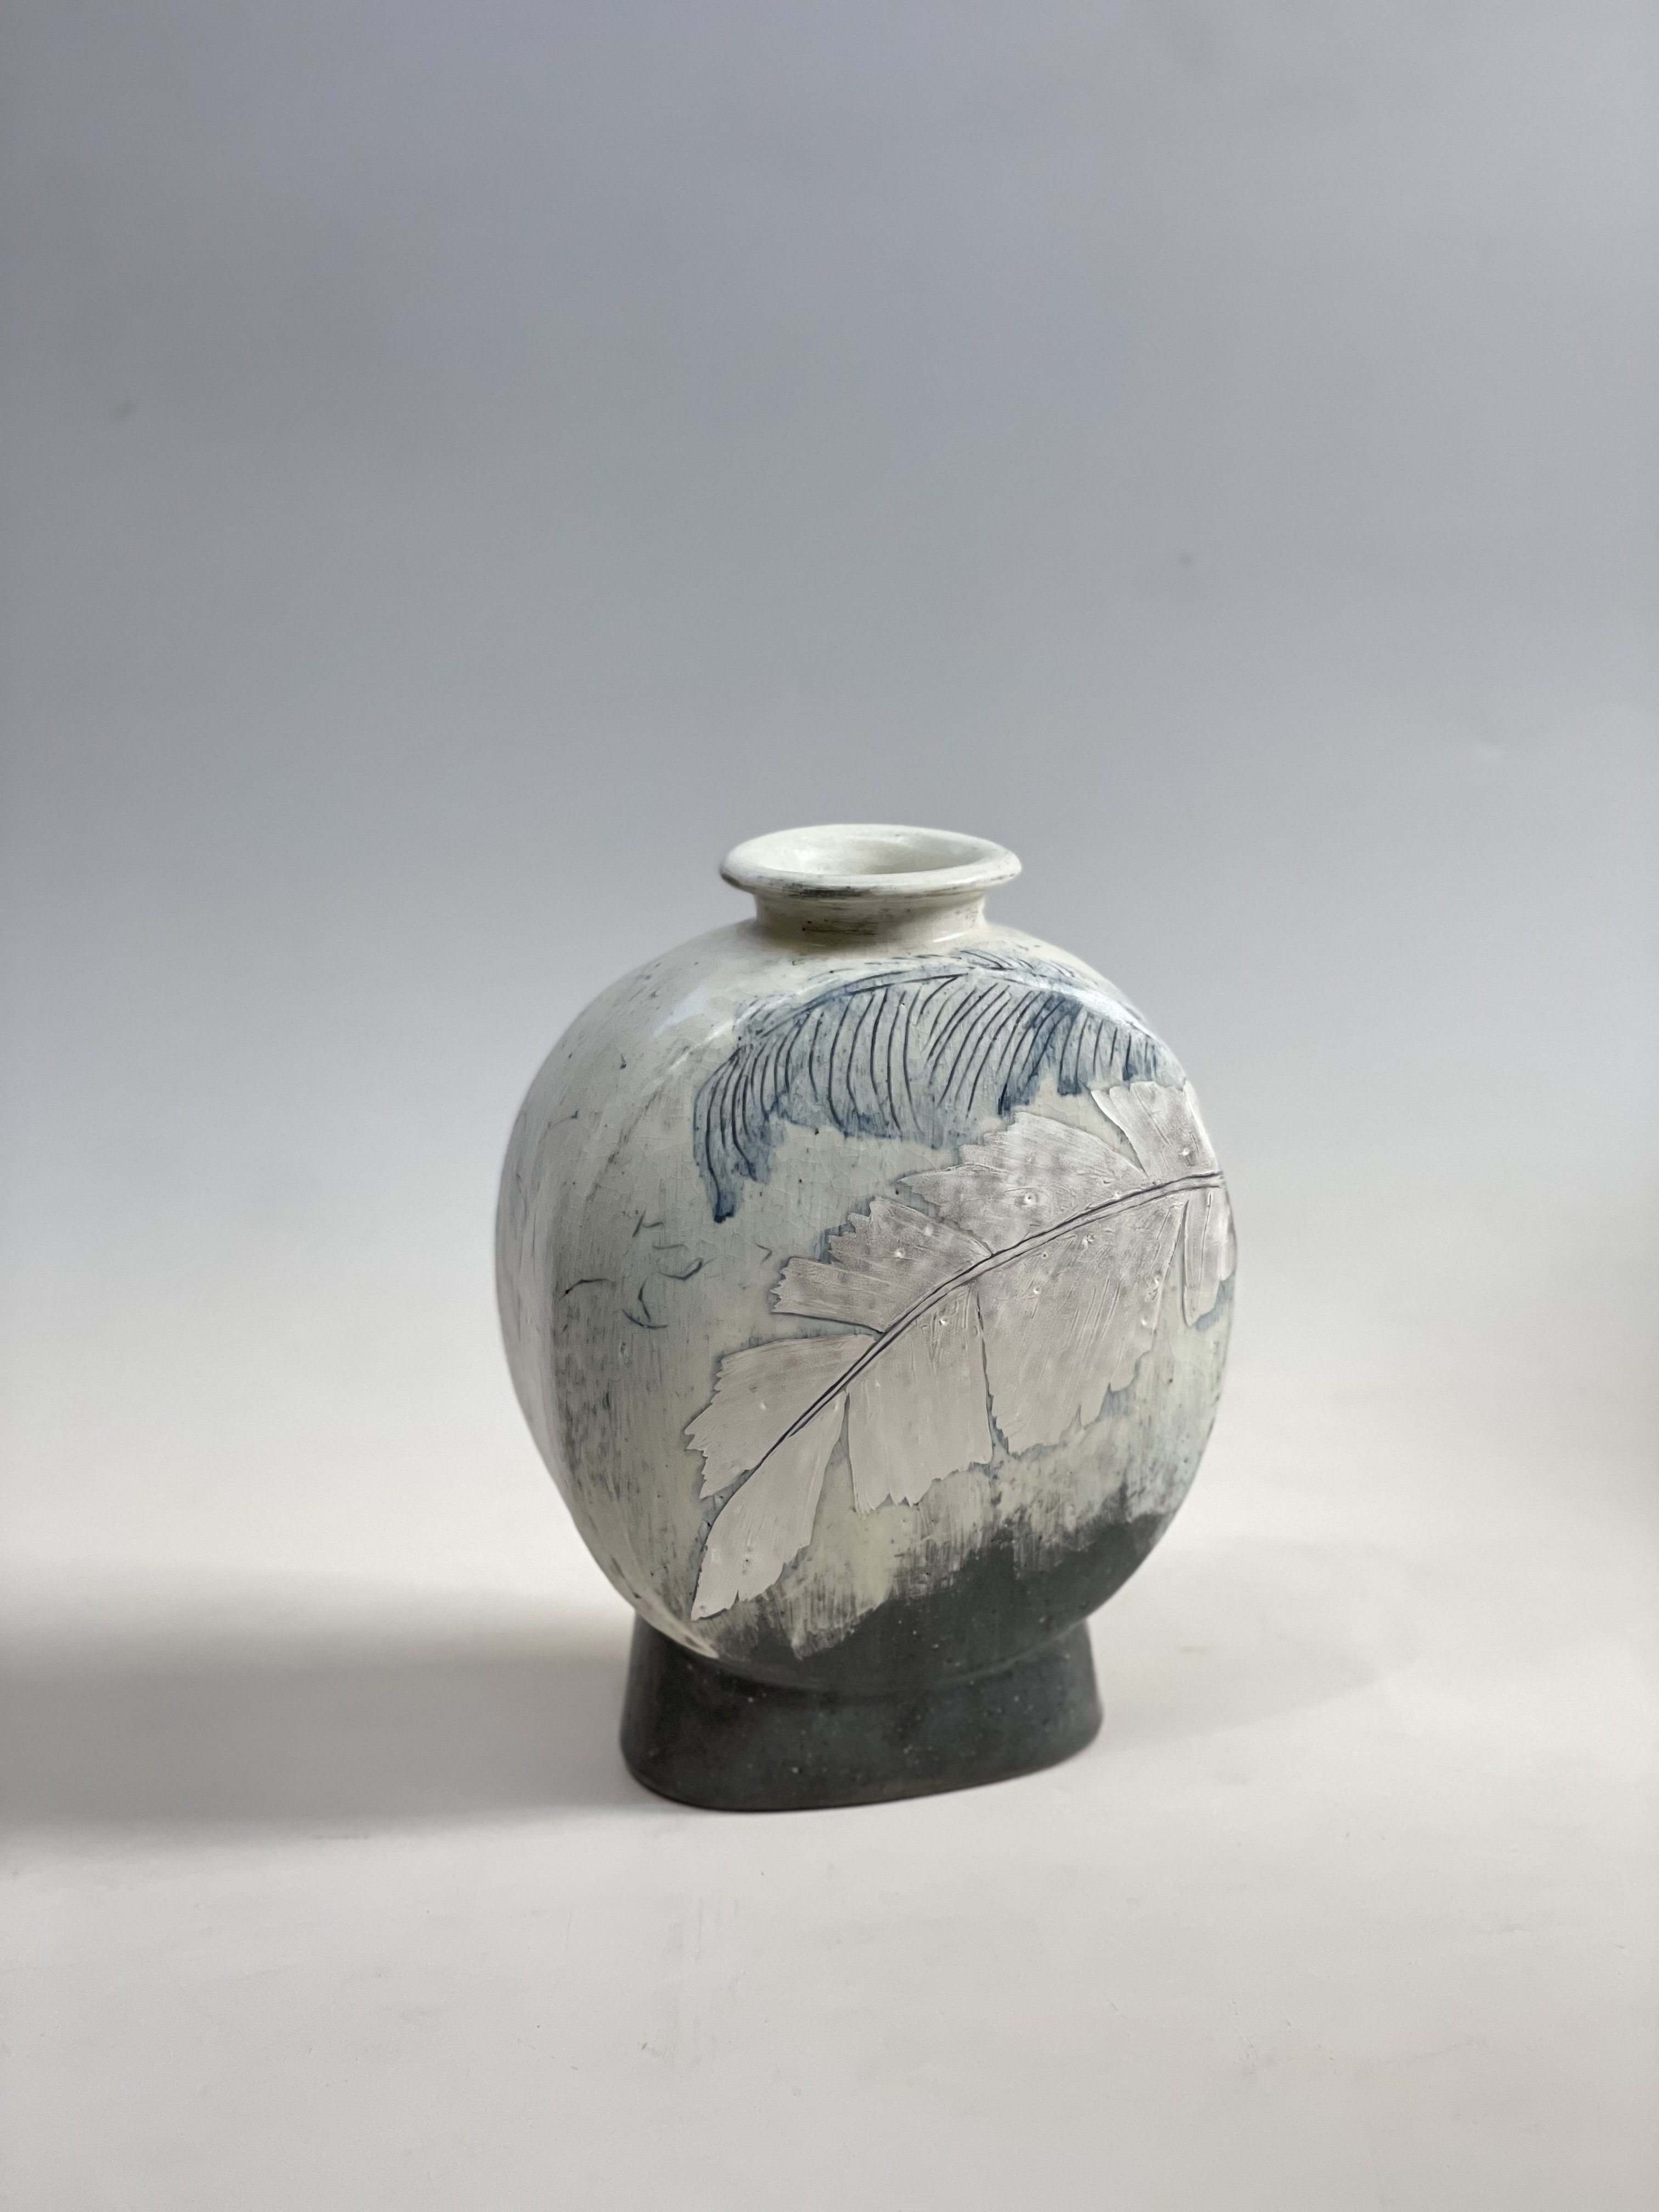 A piece by South Korean buncheong ceramics master Huh Sangwook, who will show his work in an exhibition and lead a three-day buncheong masterclass at Hong Kong’s Lump Studio, from June 8-10. Photo: Lump Studio